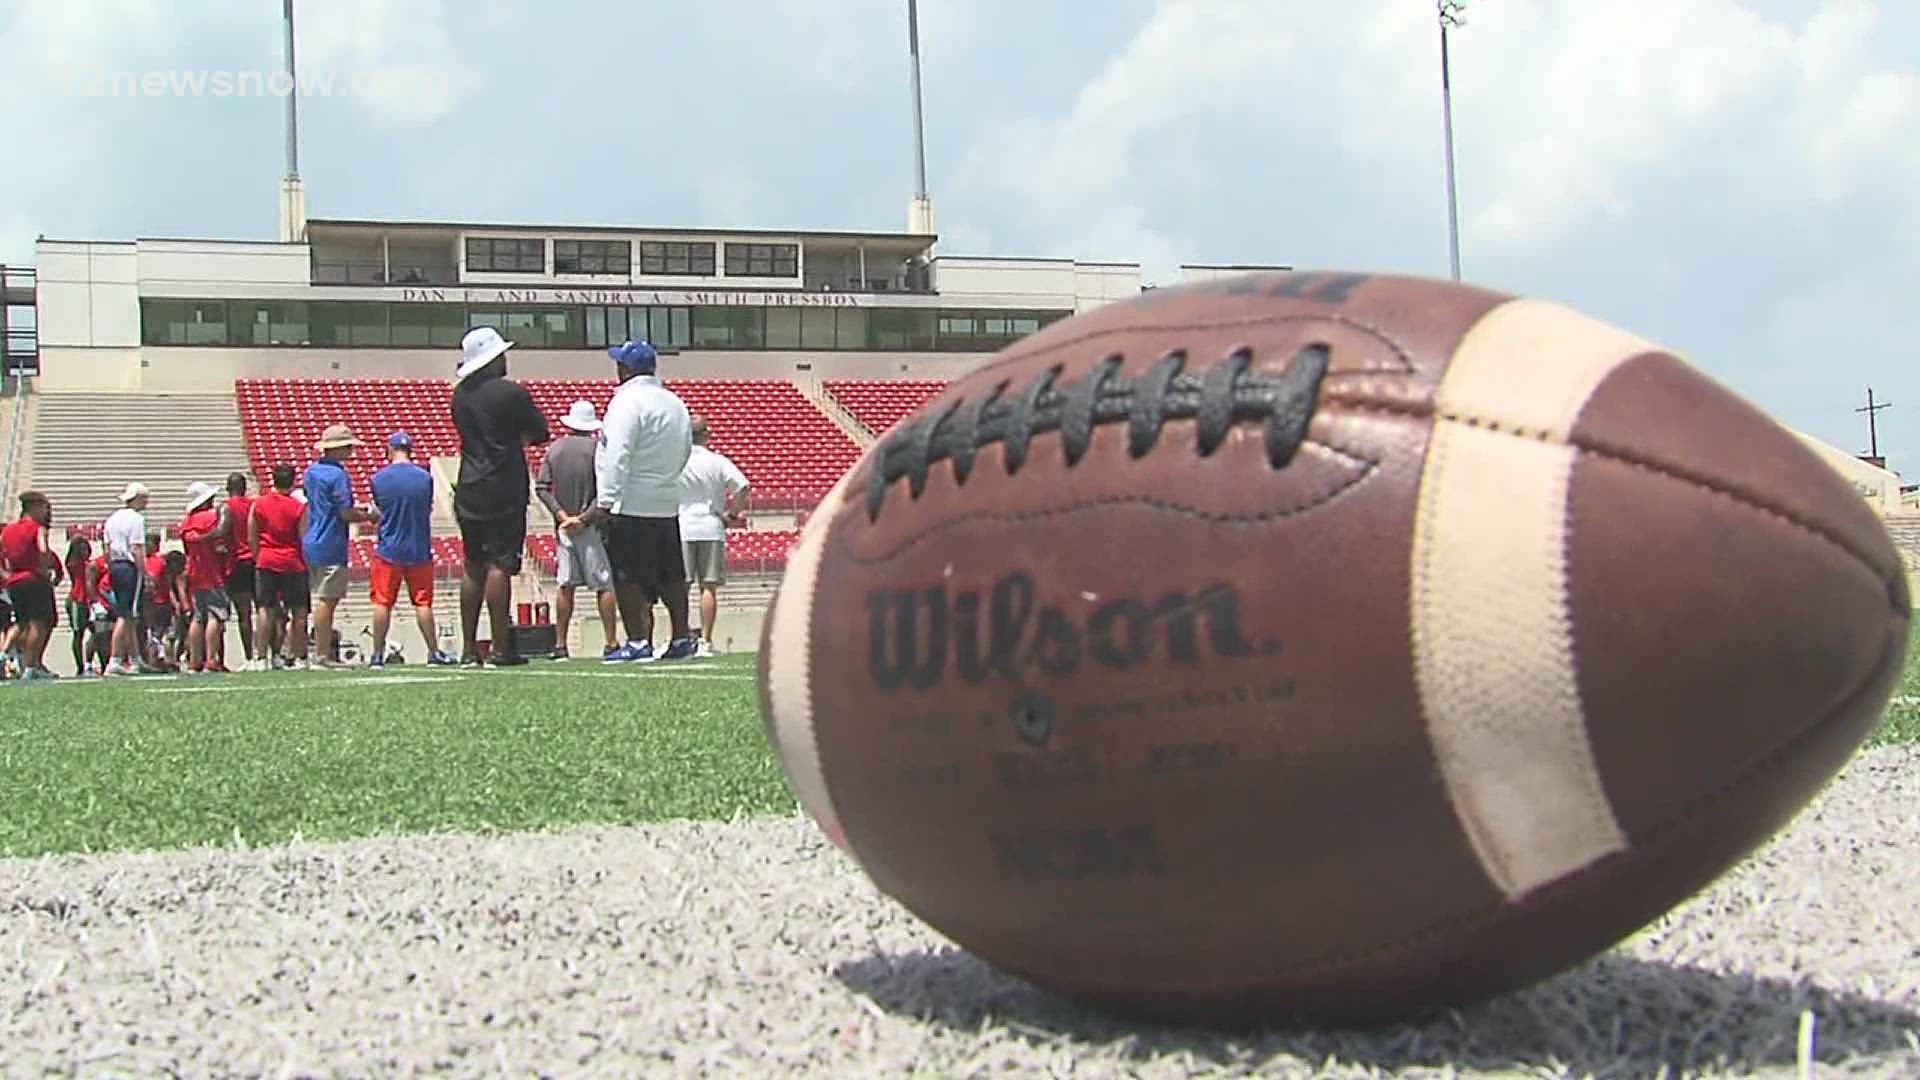 Lamar youth football camp is scheduled for next week